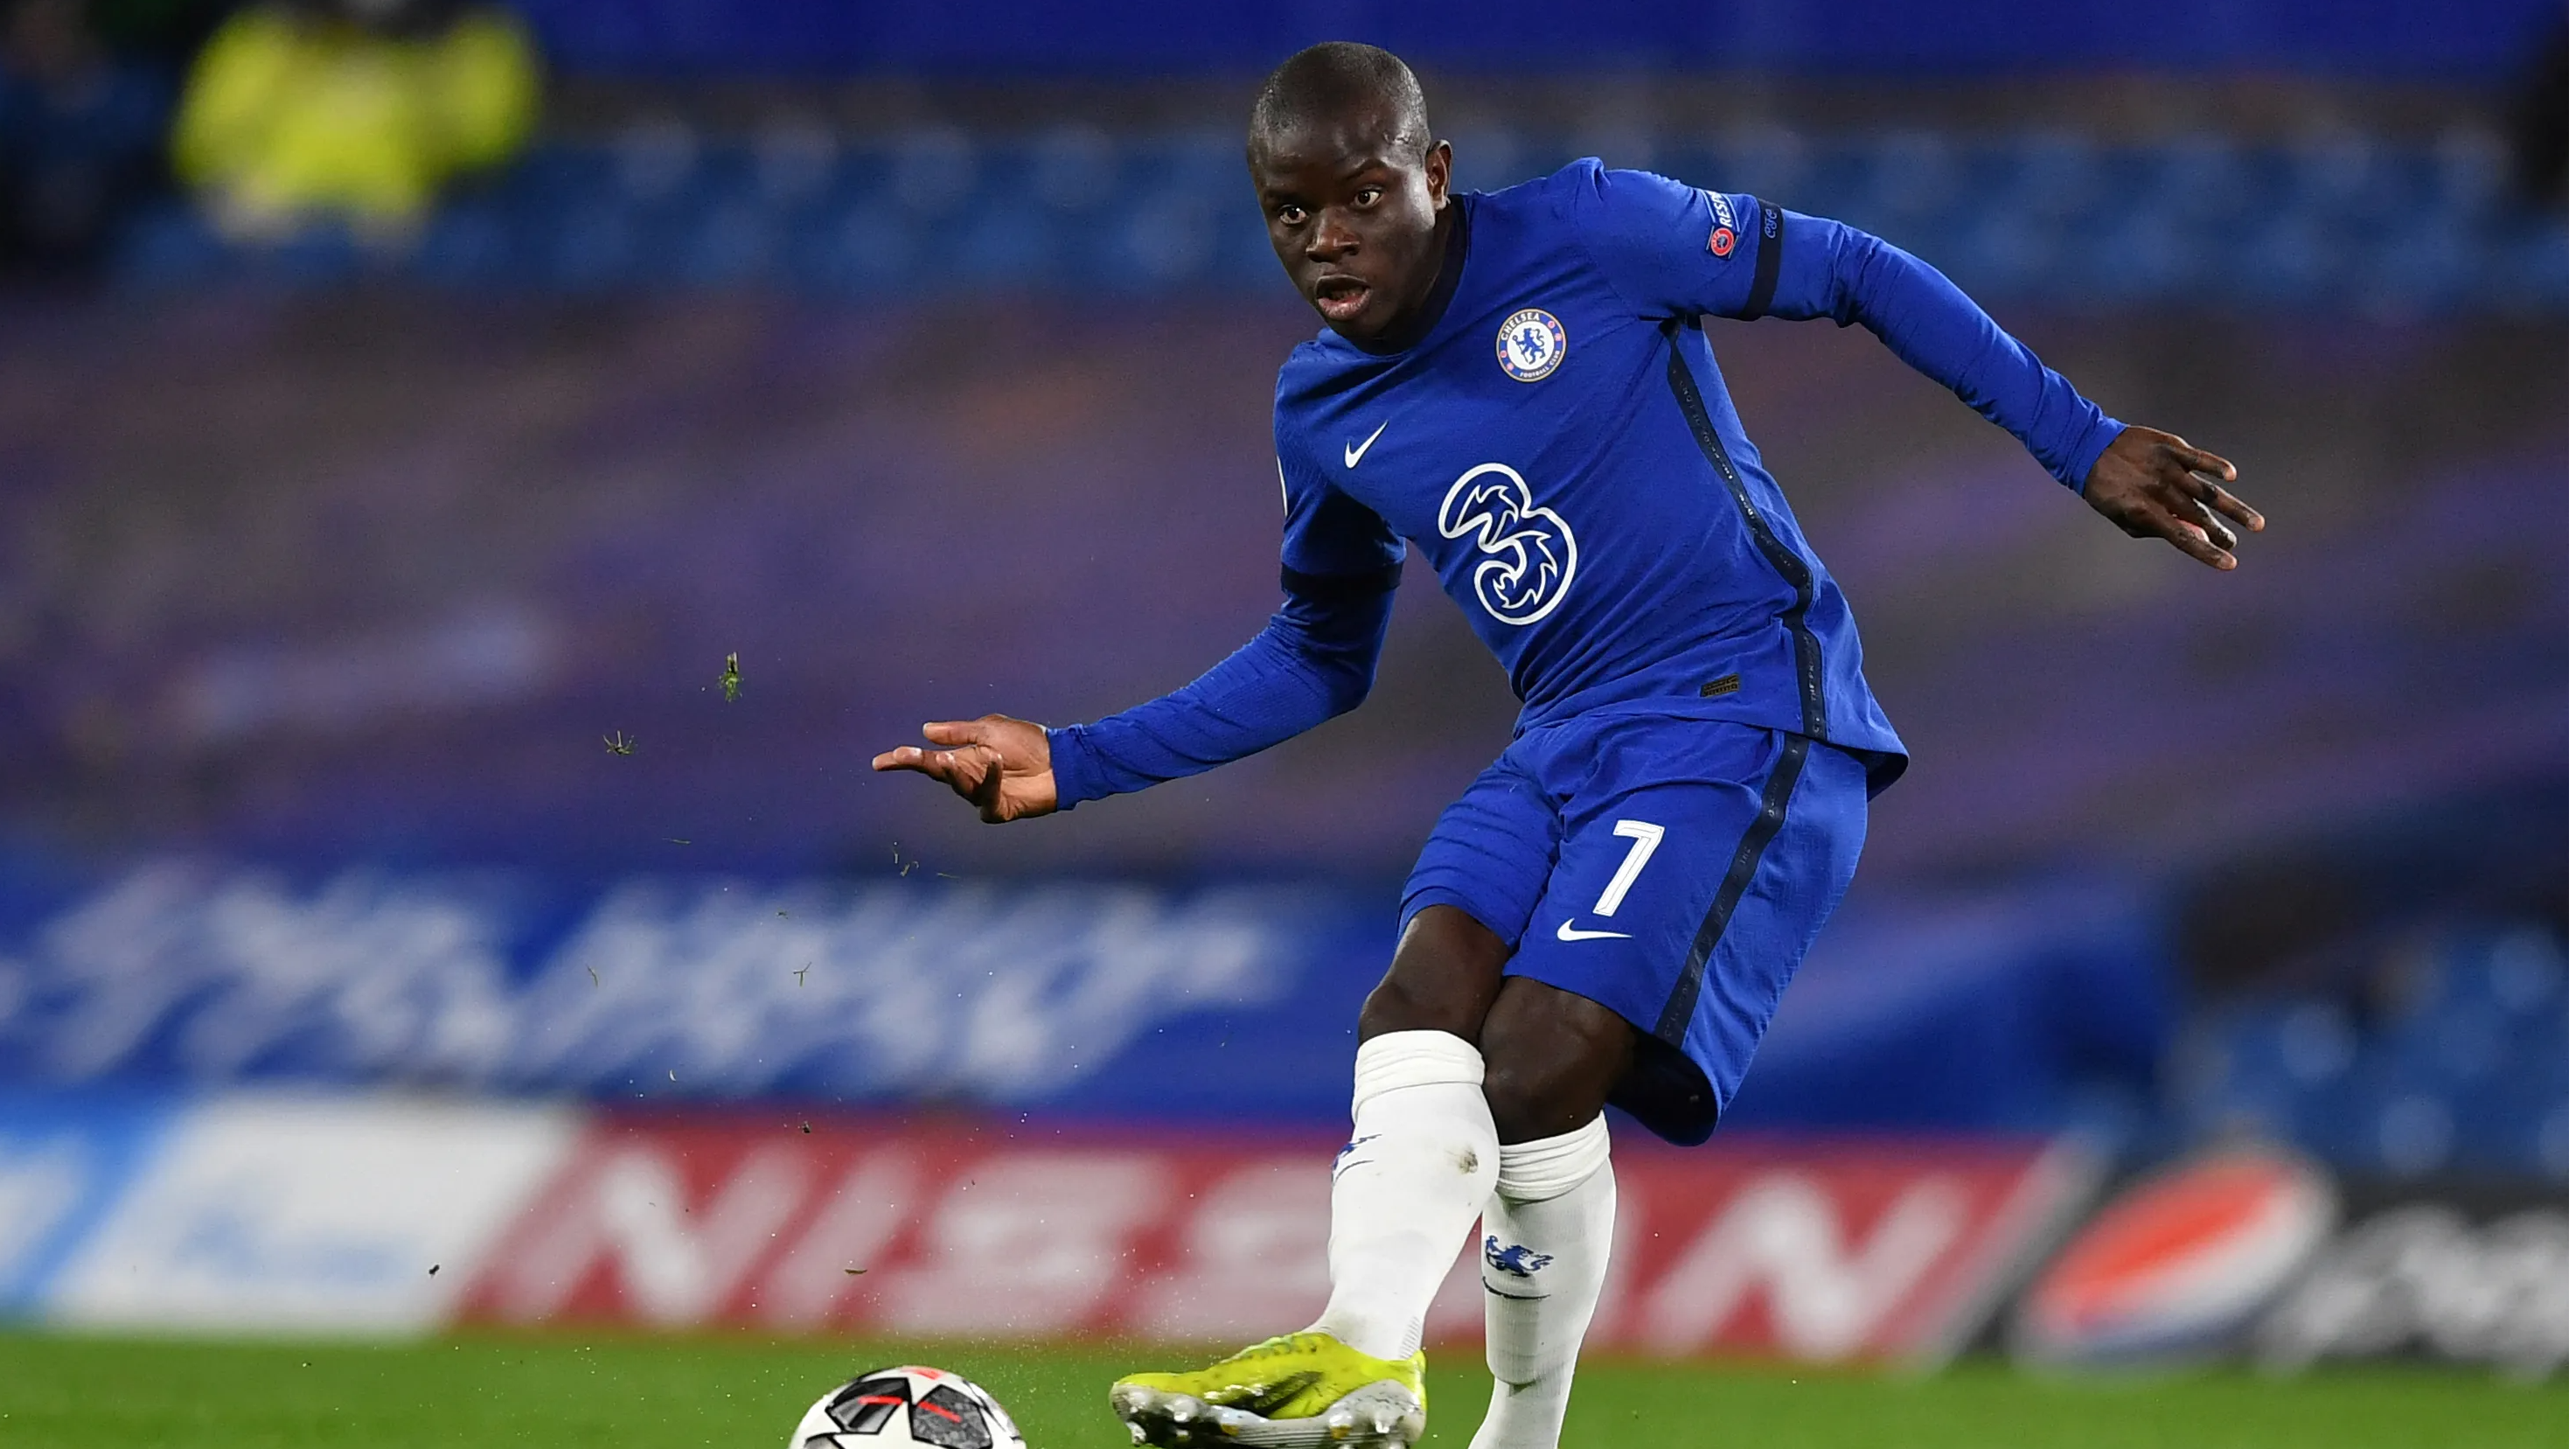 Who is N’golo Kante?